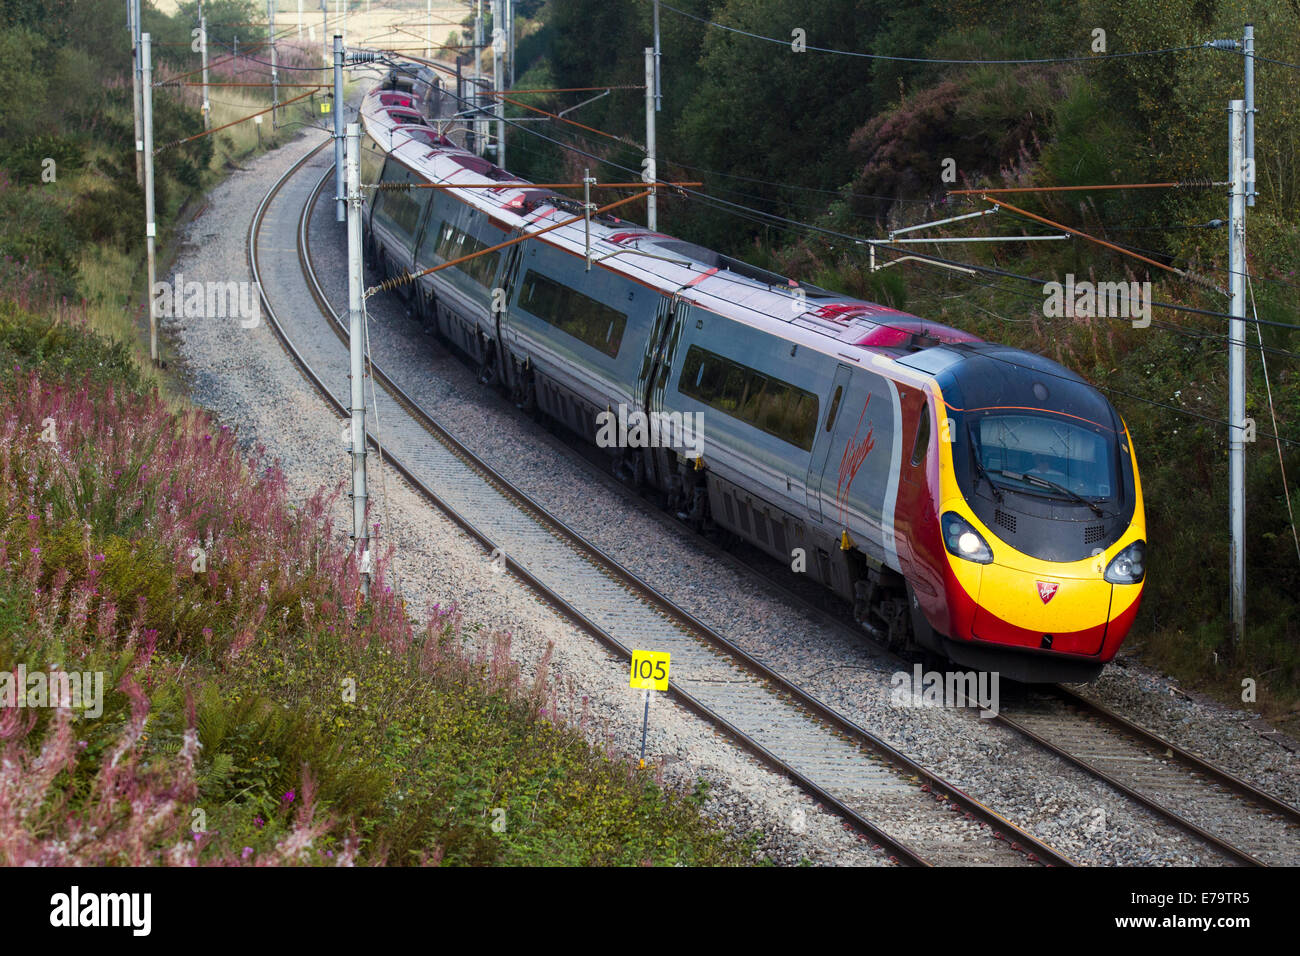 Virgin Voyager Train at Shap, Power lines, and gantries for electric trains. British Railways carriages descending, West Coast Line, Cumbria, UK Stock Photo